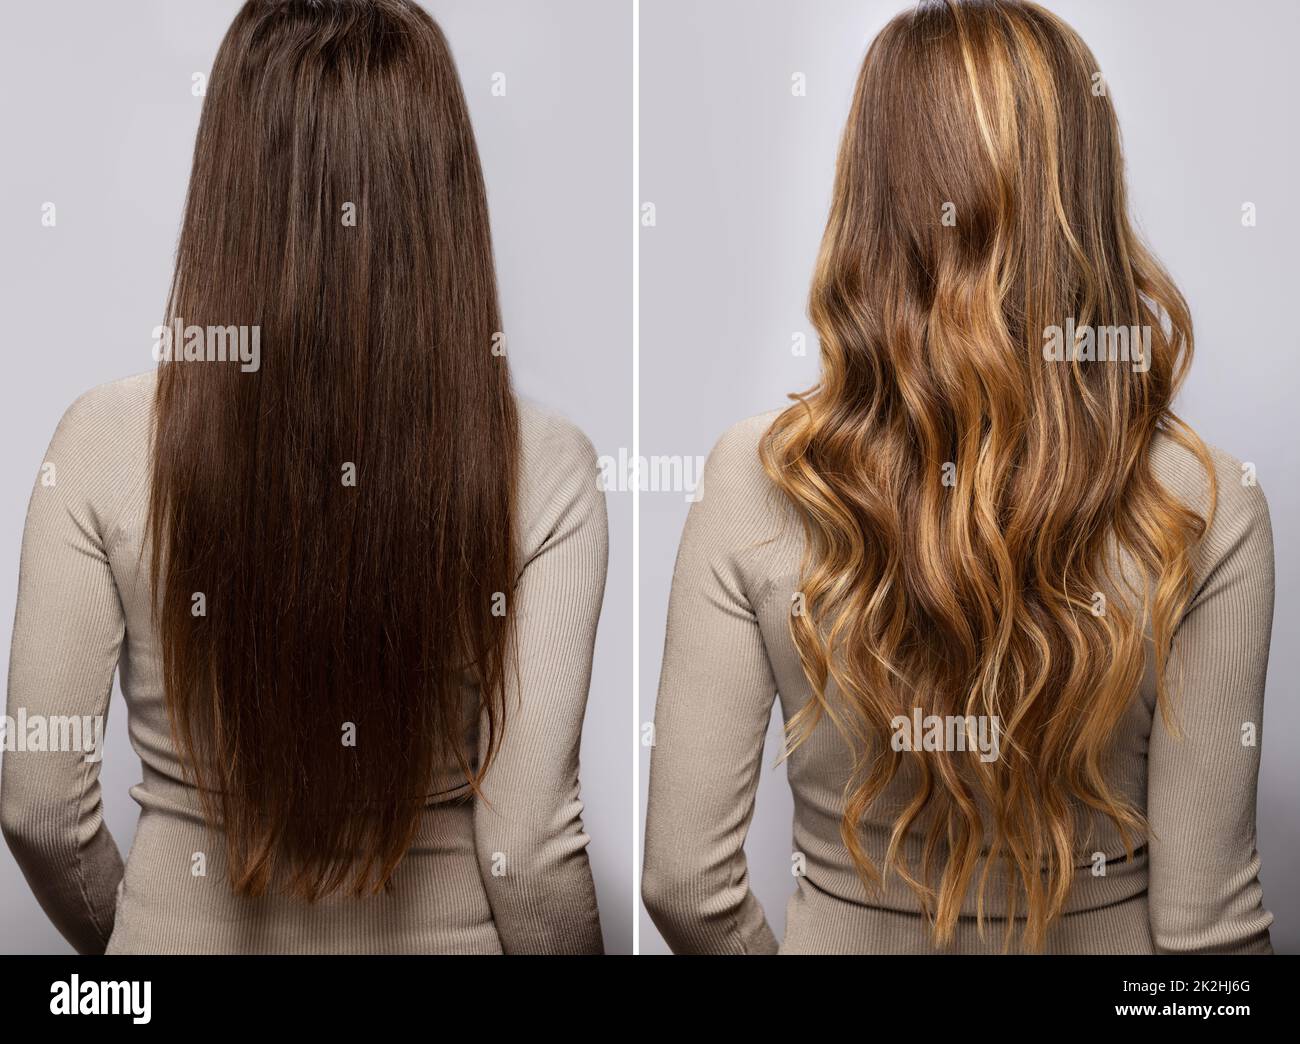 6. How to Maintain Brown Hair After Dyeing from Blonde - wide 1